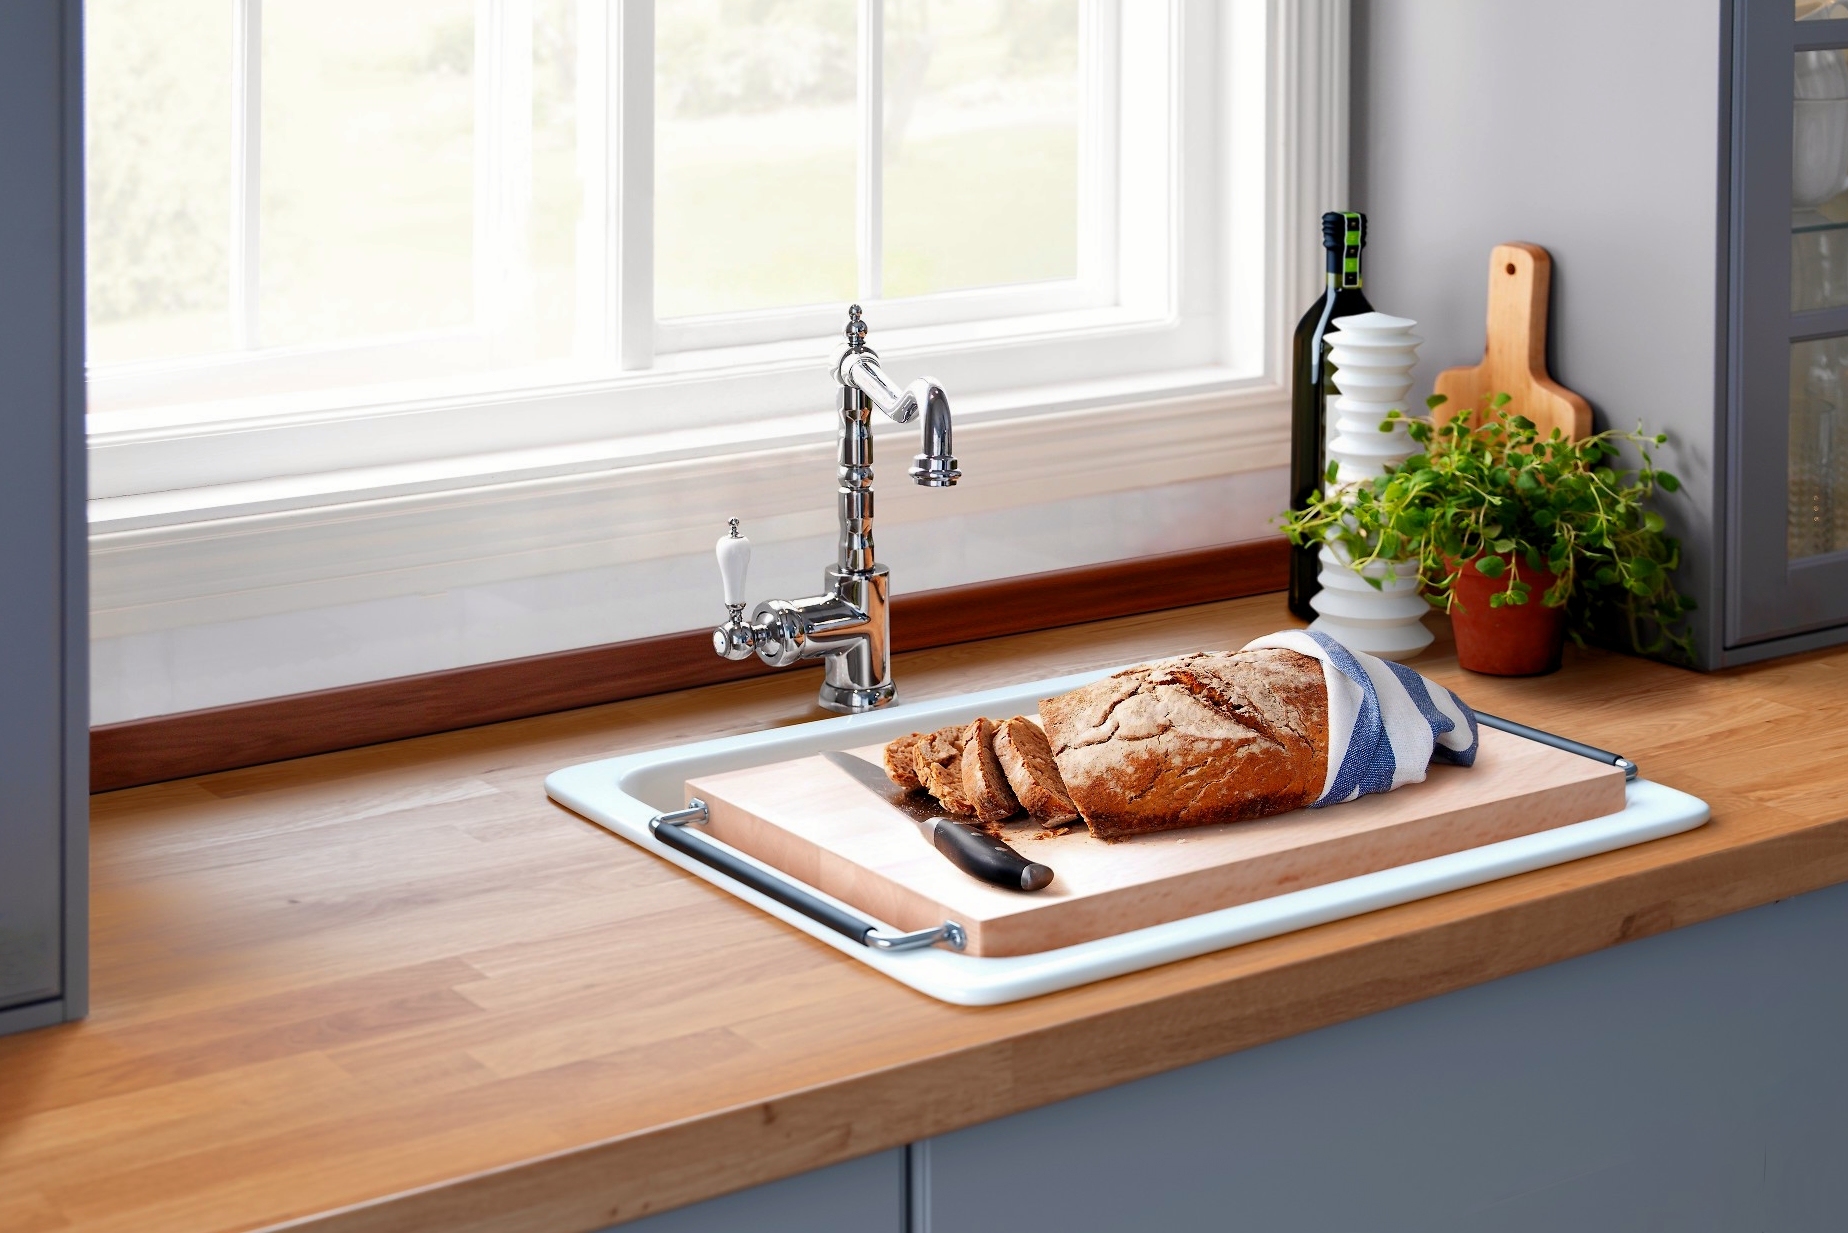 Cleaning the Kitchen: How to Clean Cutting Boards?